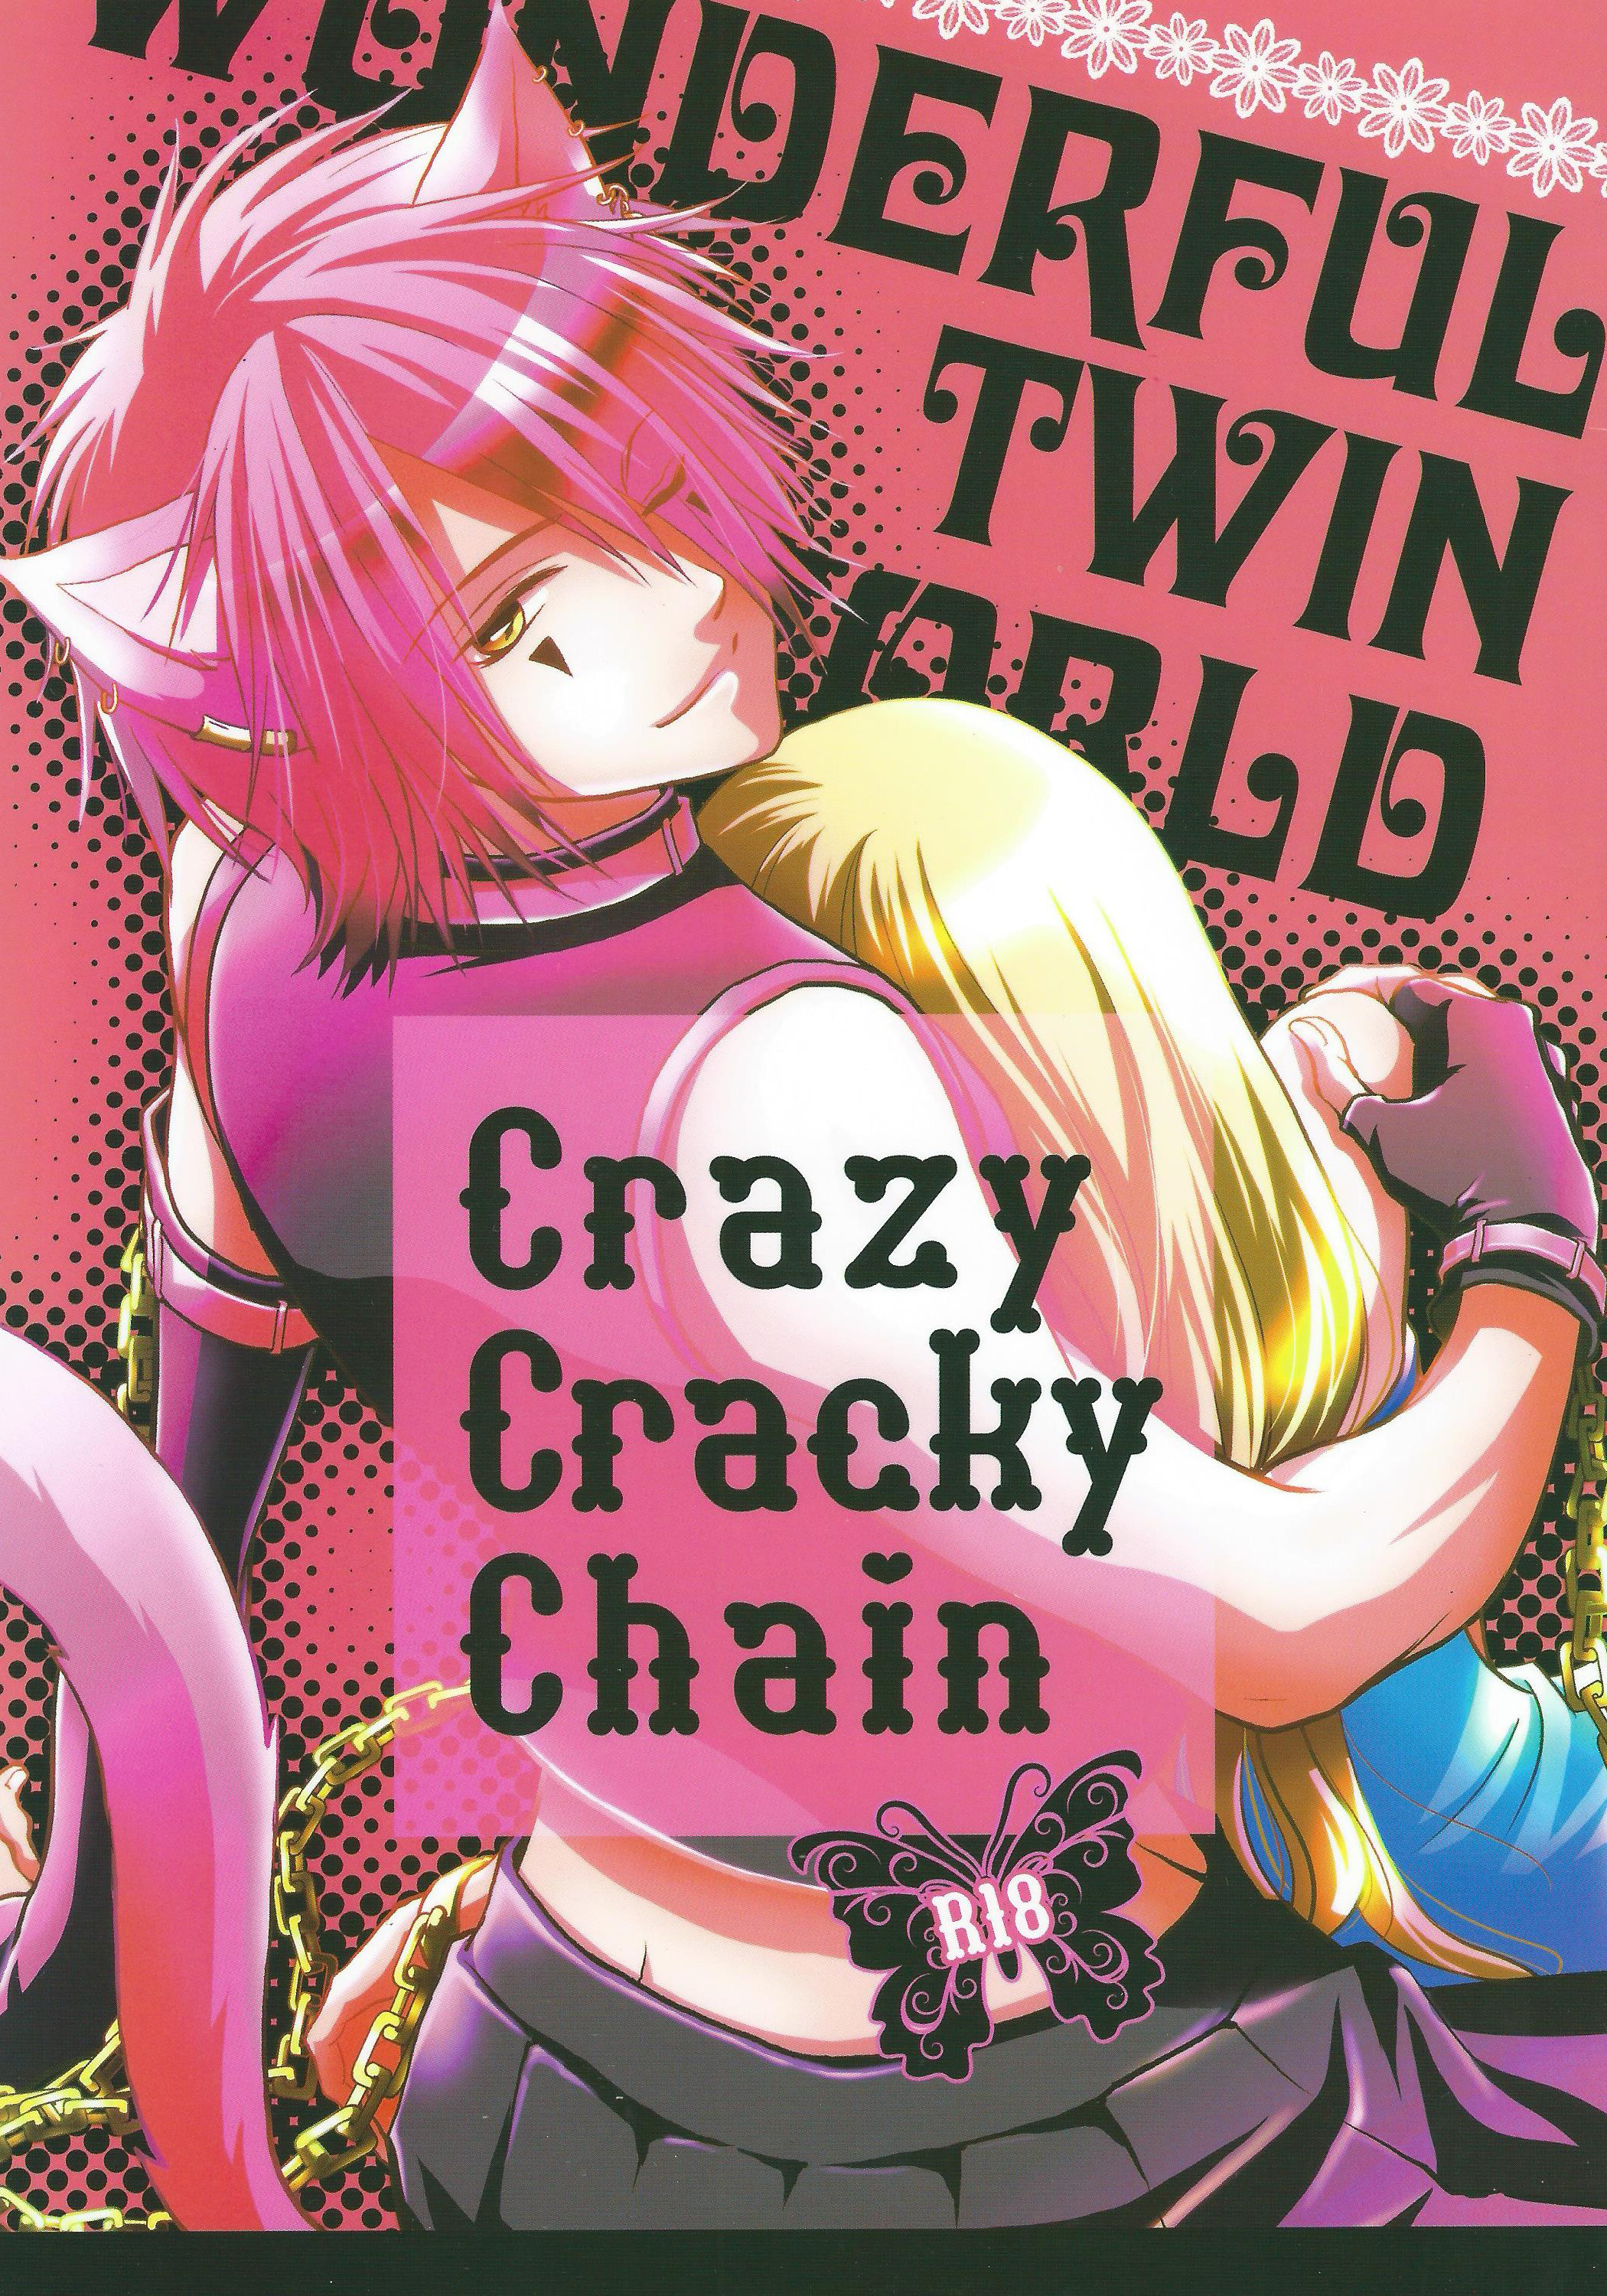 Read The Spark9 [tate A Tate Elijah ] Crazy Cracky Chain Alice In The Country Of Hearts